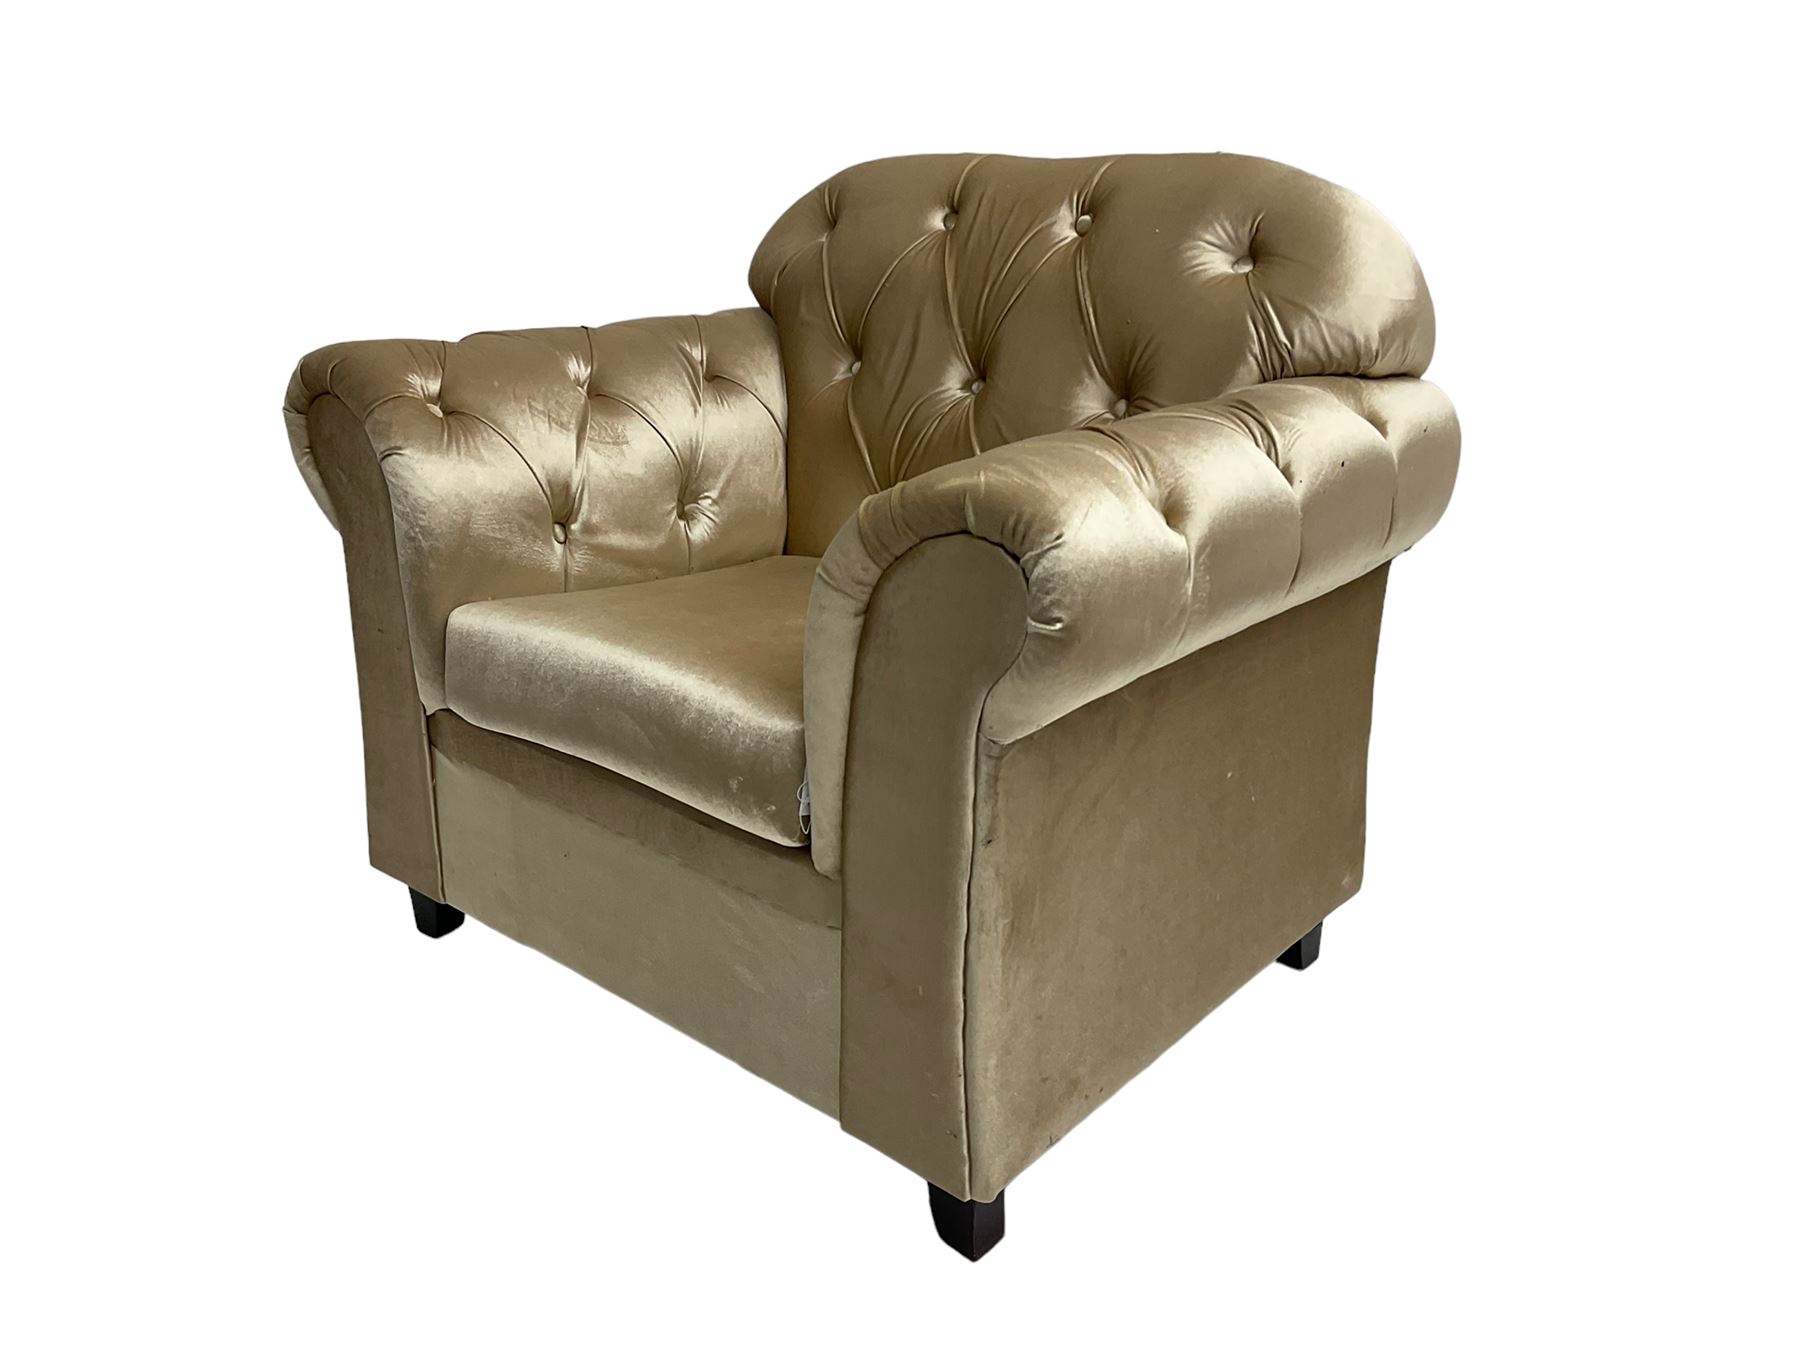 Chesterfield shaped armchair - Image 2 of 6